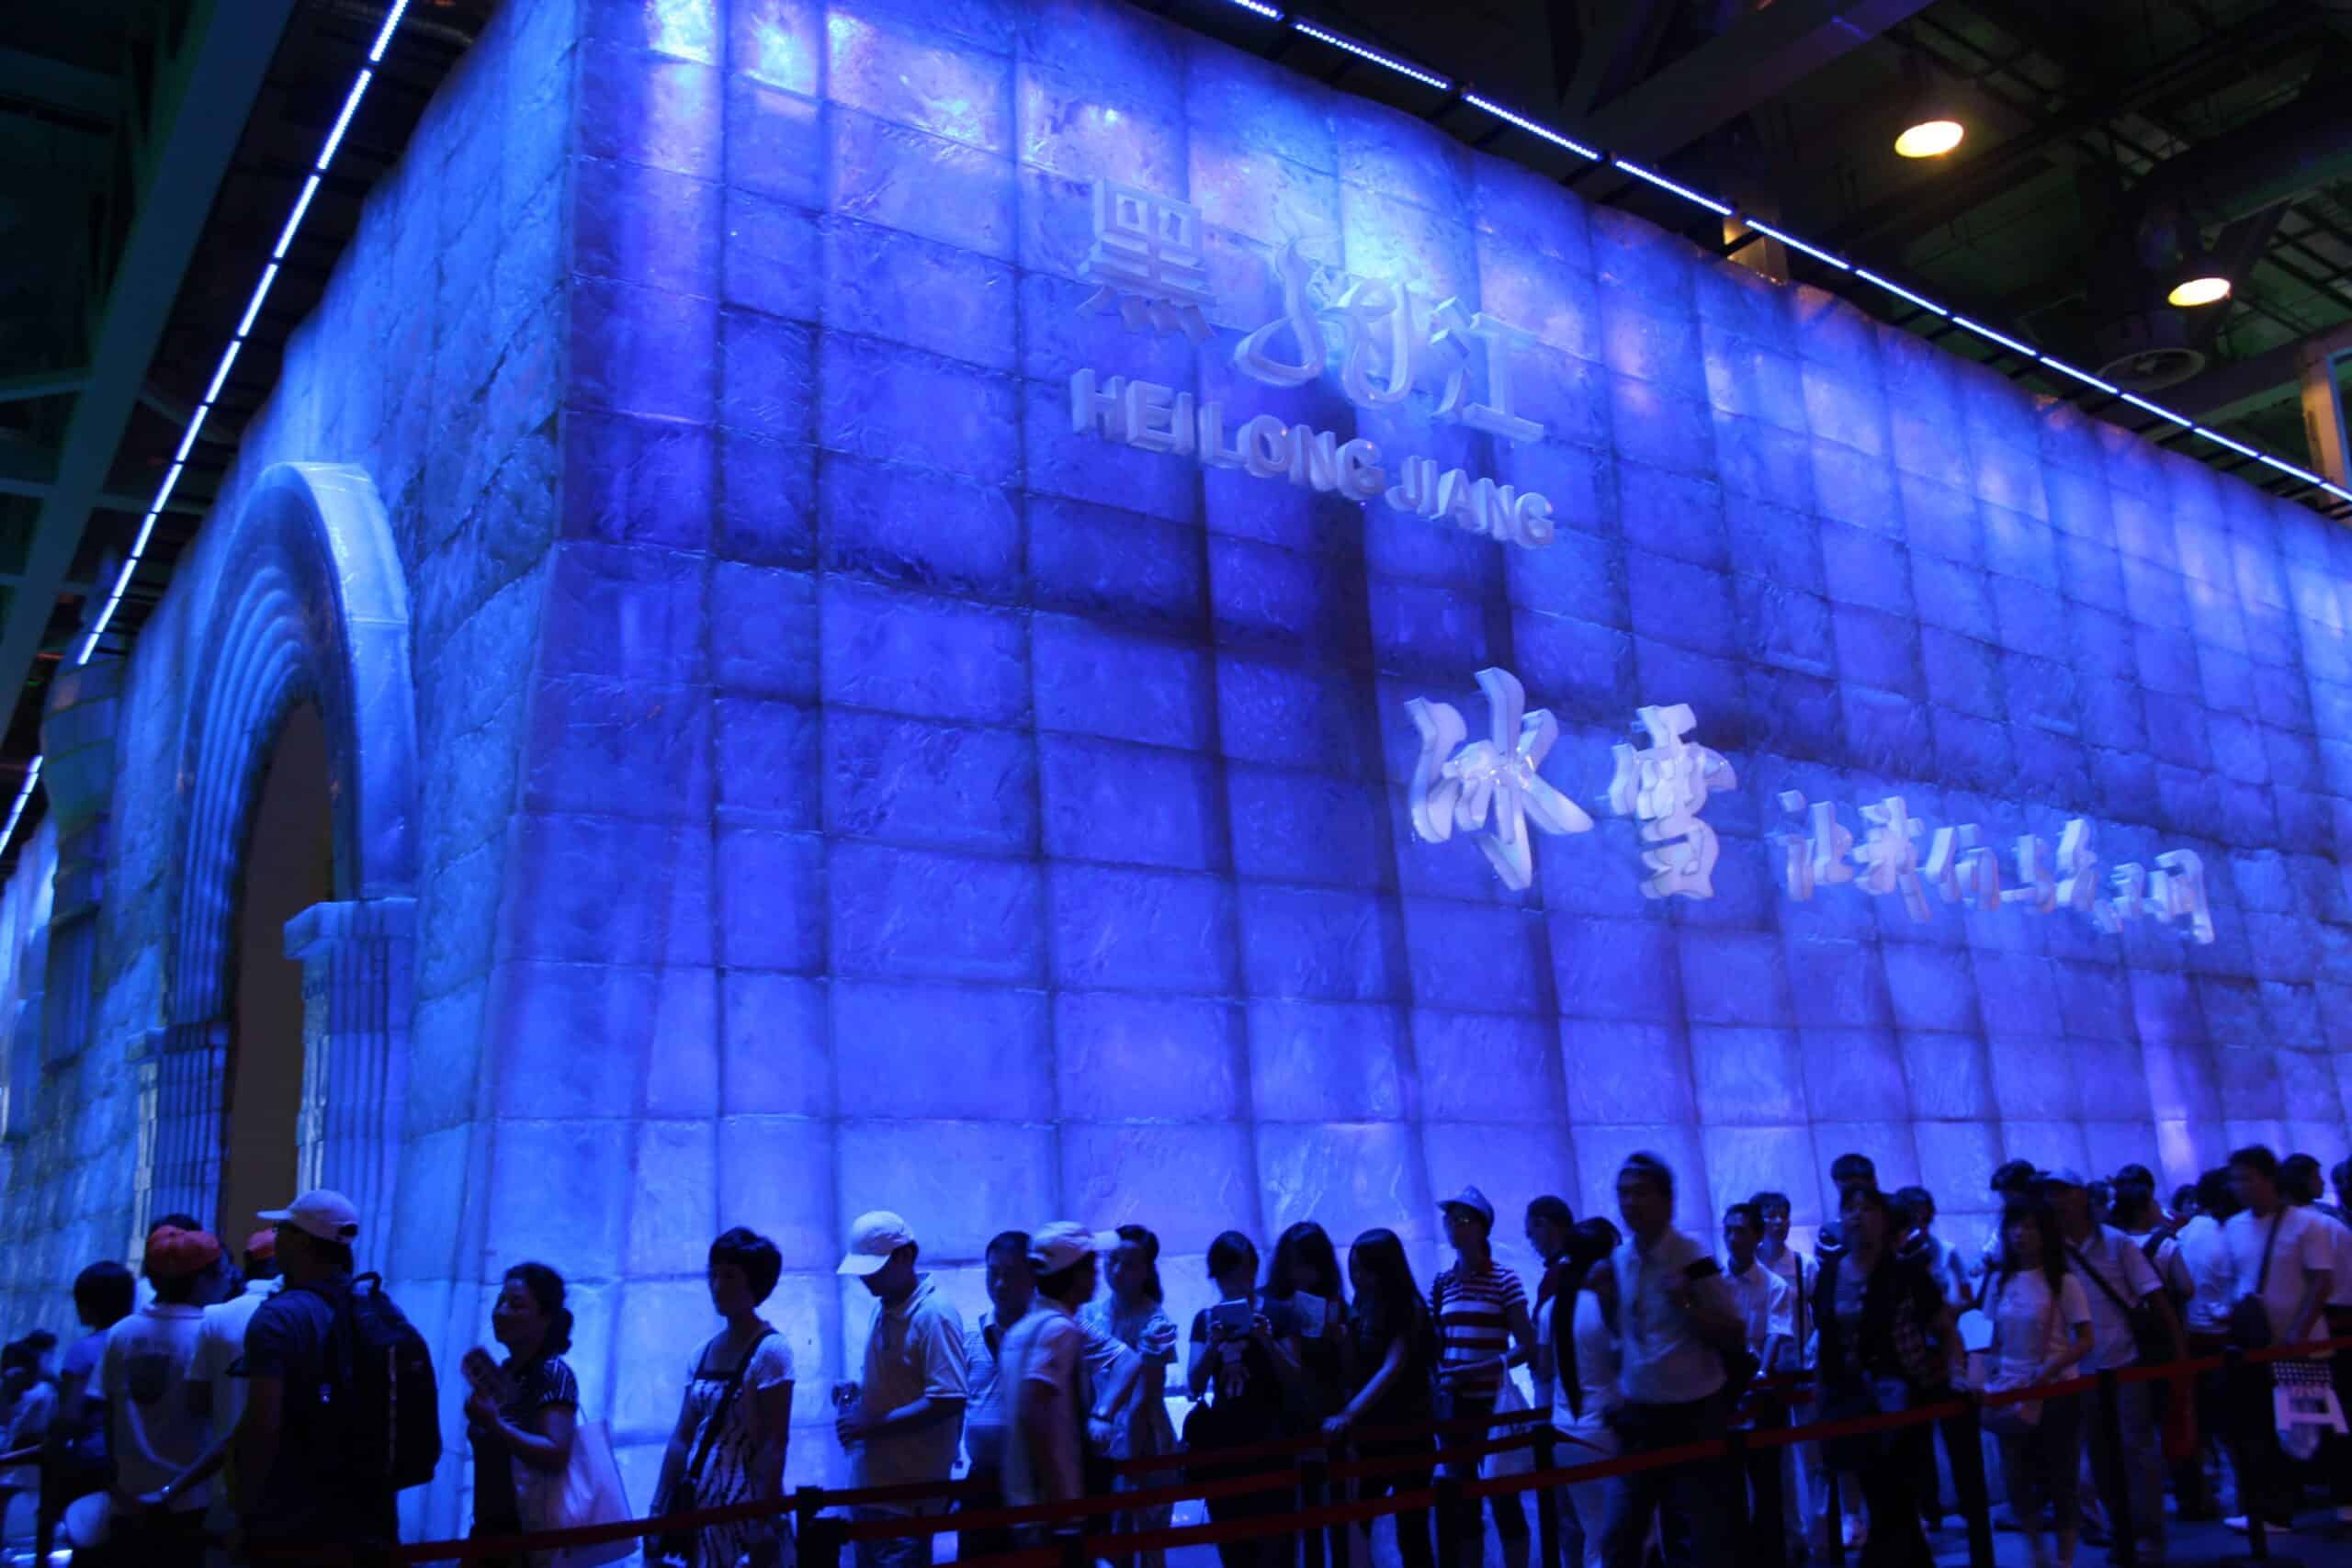 People queuing to see the Heilongjiang Exhibit at the Expo 2010 in Shanghai, China